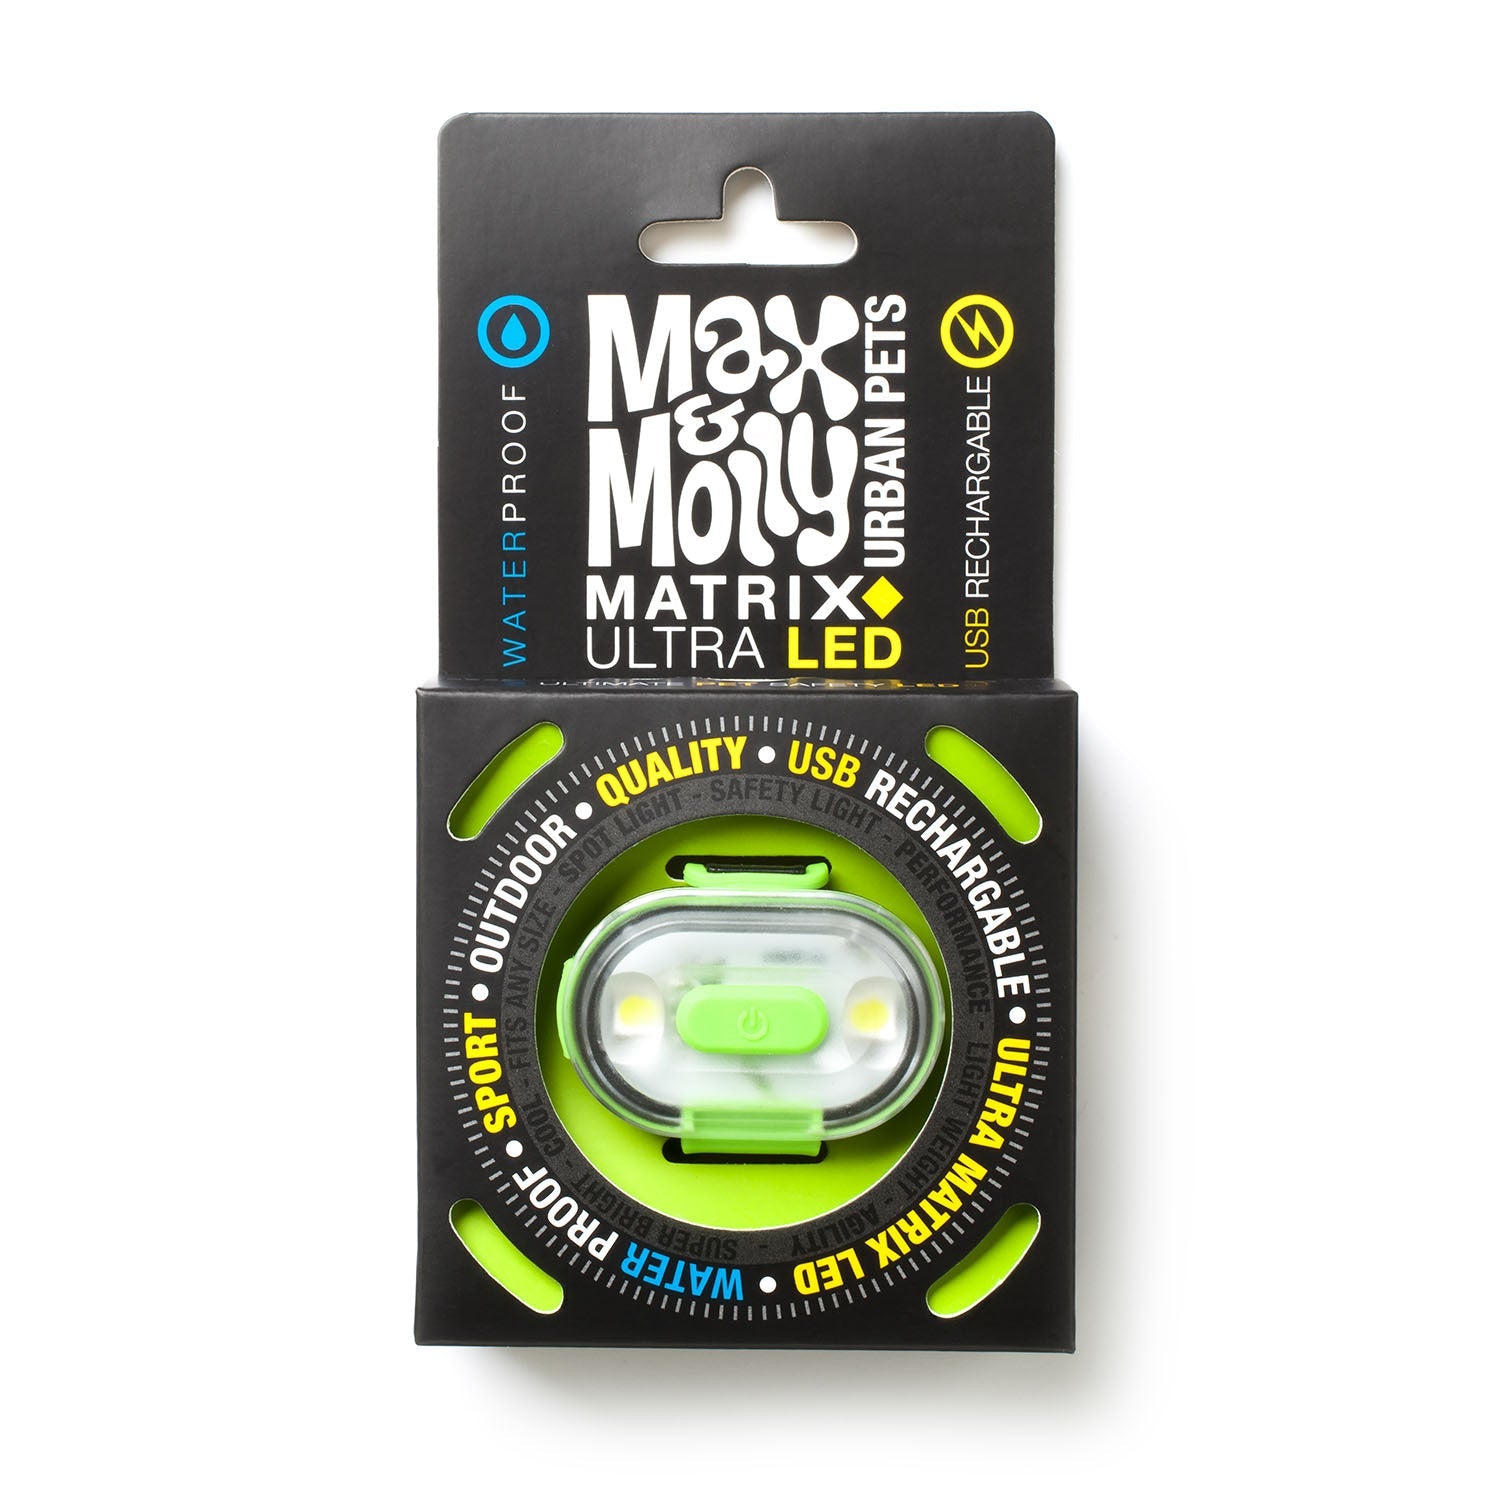 Max & Molly Matrix Ultra LED Harness/Collar Safety light - Pets and More